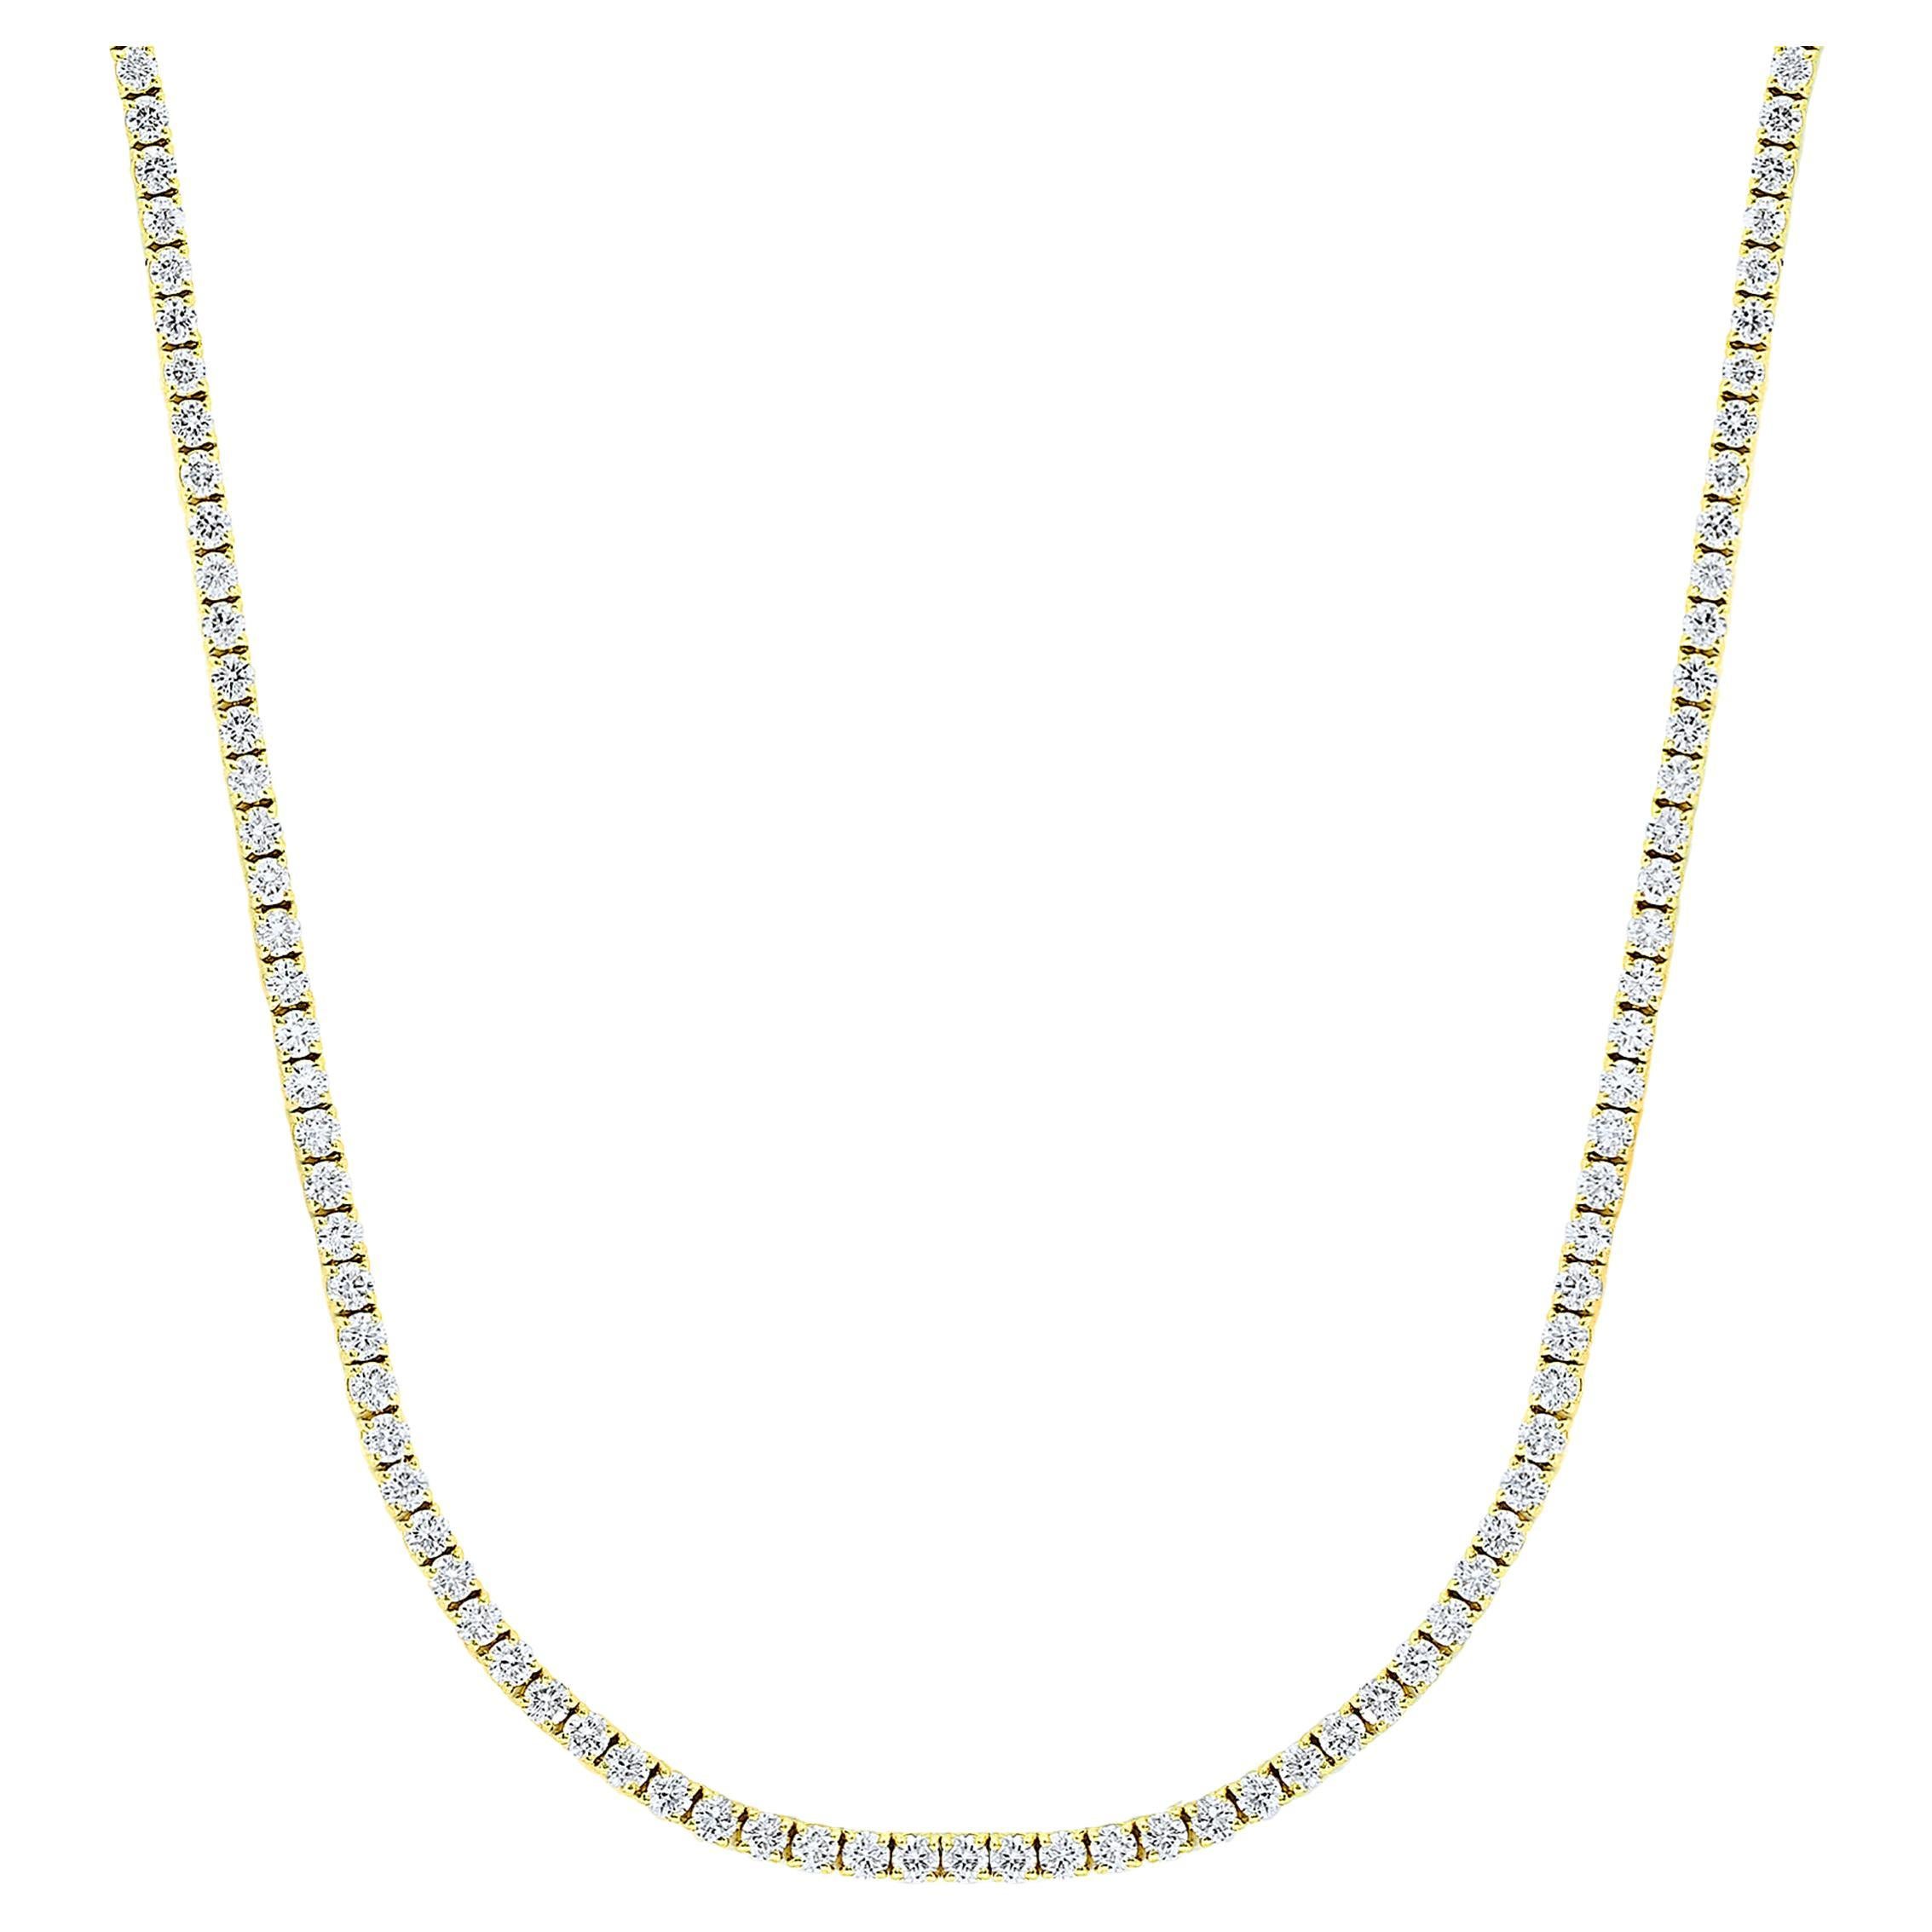 11.31 Carat Diamond Tennis Necklace in 14K Yellow Gold For Sale